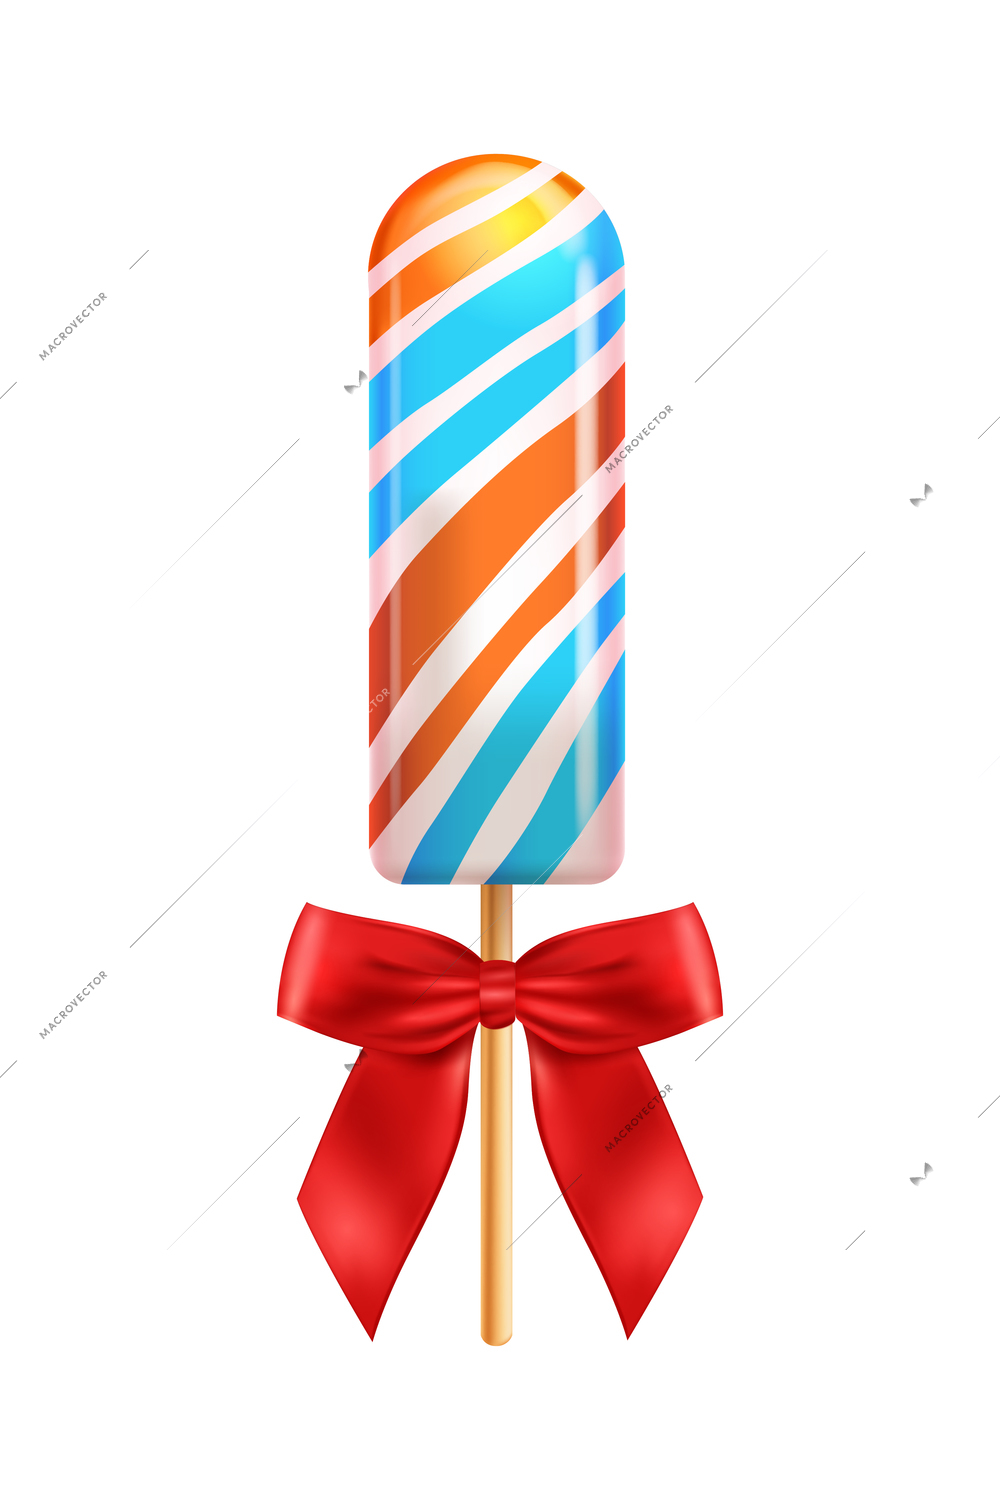 Realistic lollipop red bow composition with isolated image of ice cream shaped candy on stick vector illustration